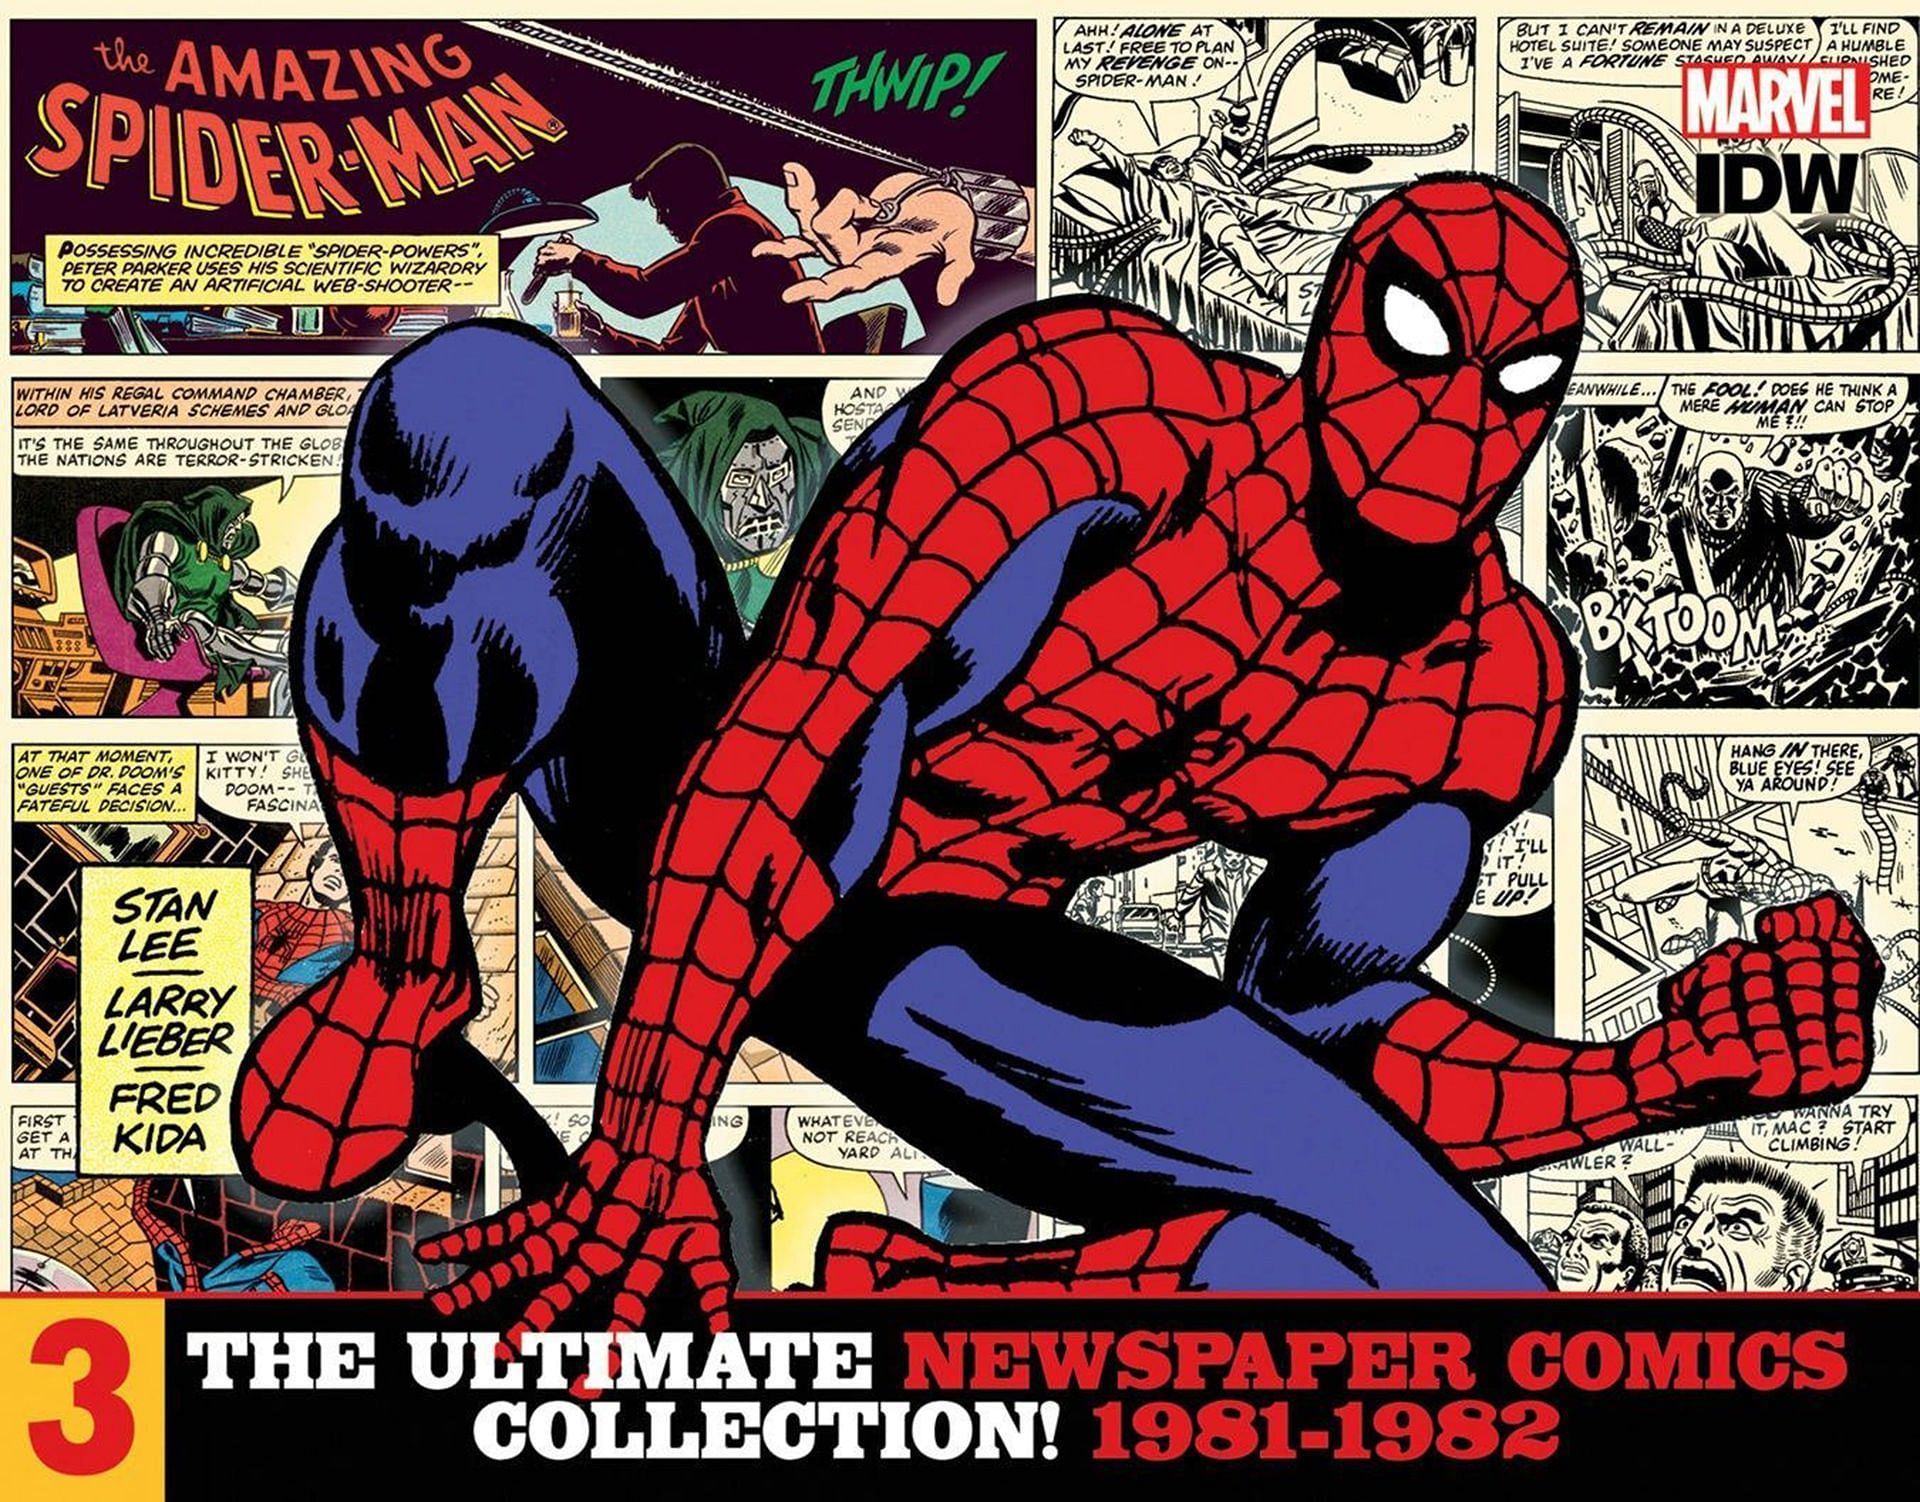 The Amazing Spider-Man: Ultimate Collection, written by Brian Michael Bendis and illustrated by Mark Bagley ( Image Via Marvel)